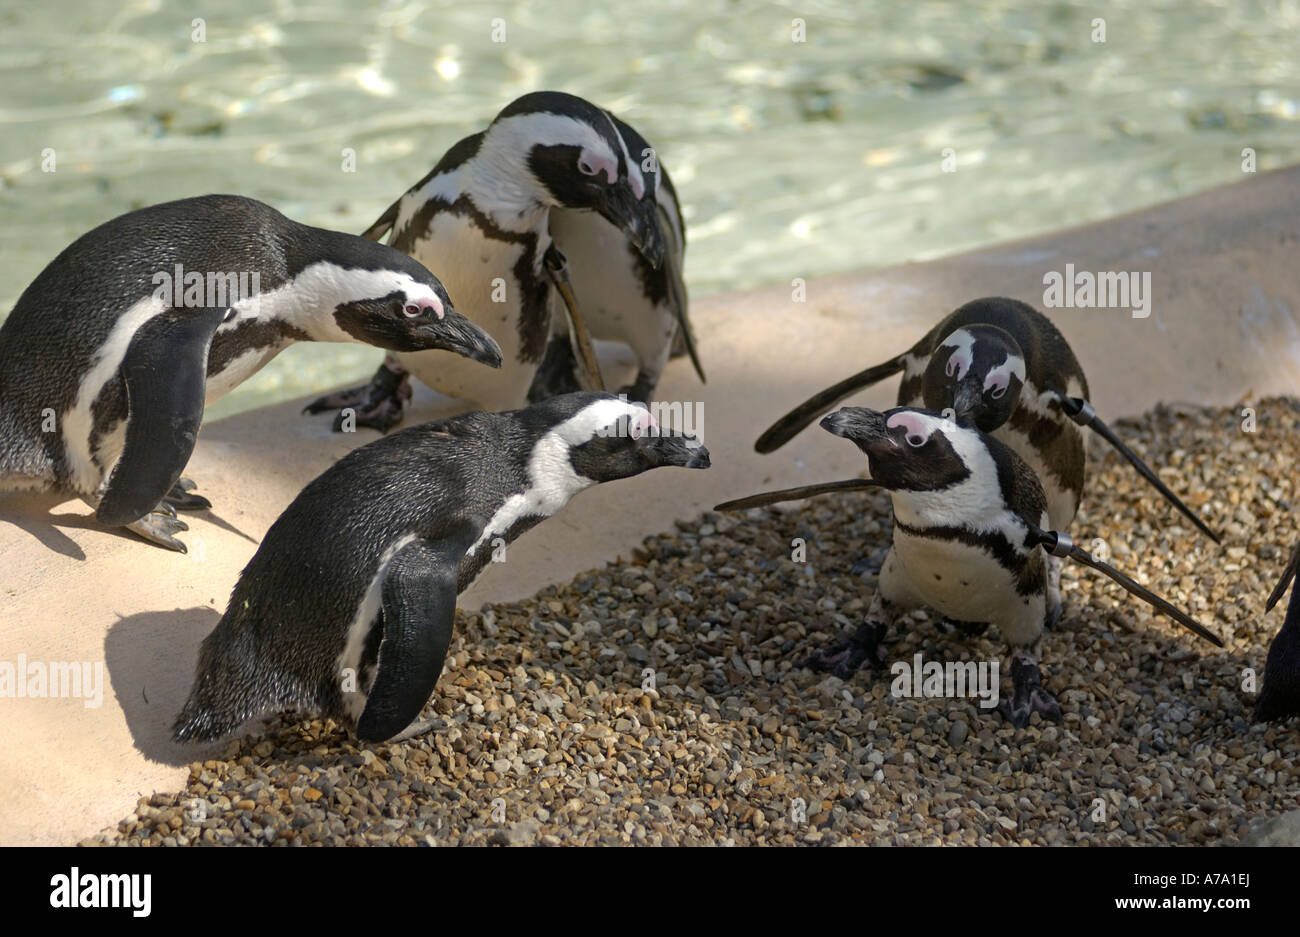 Blackfooted African “Jackass” Penguins in captivity have fun in the spring sunshine at a Zoo, England Stock Photo